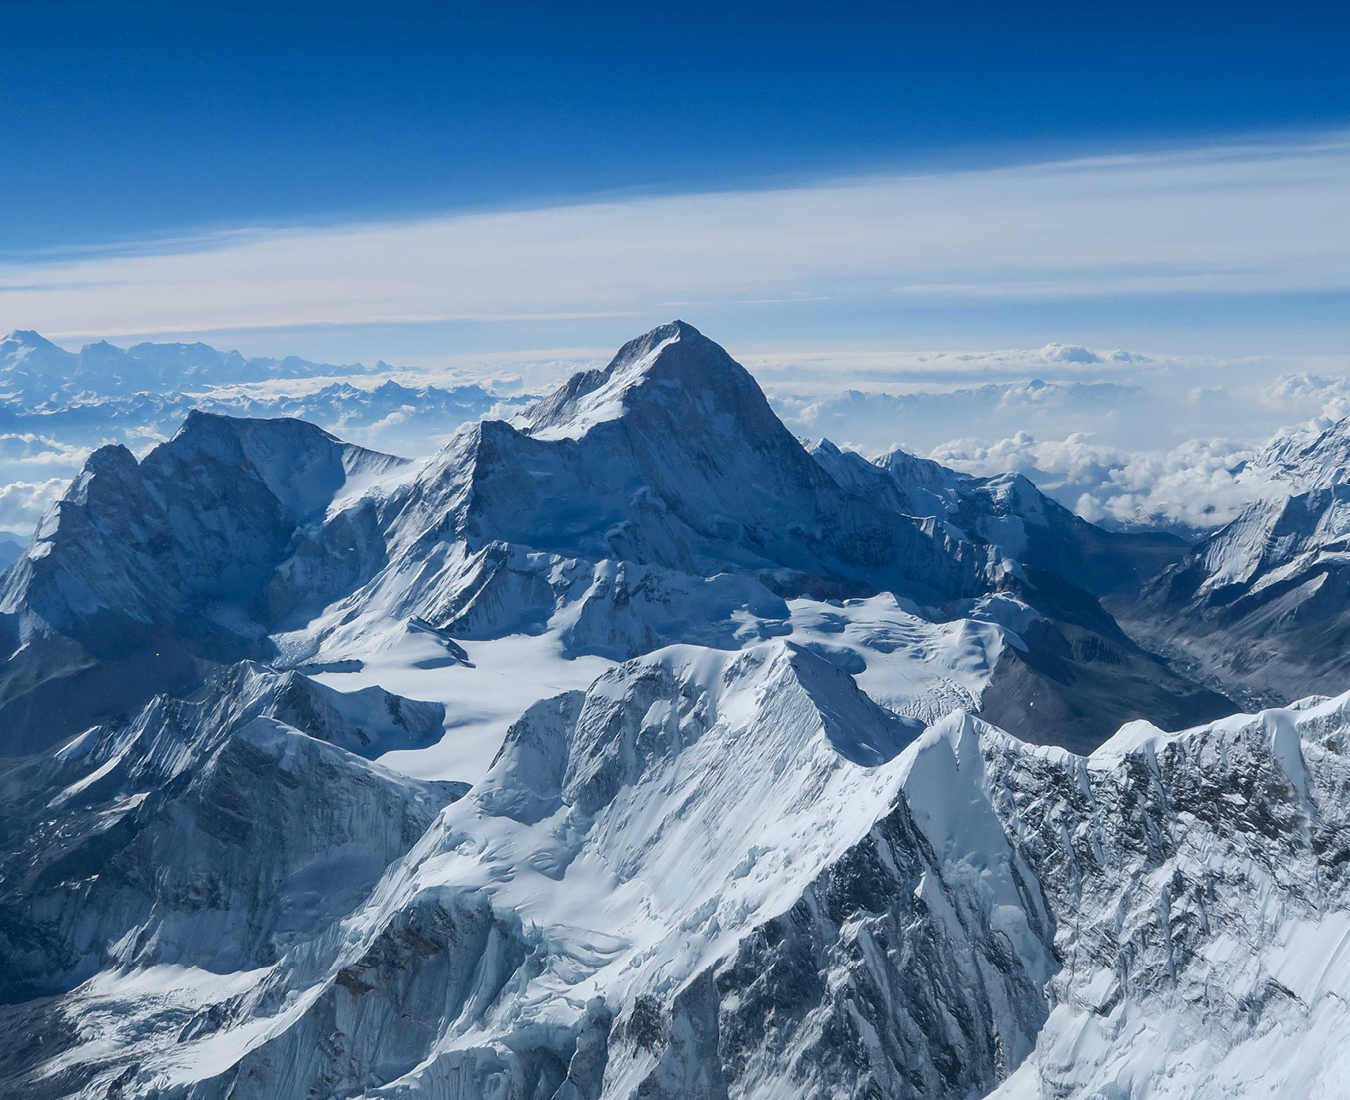 Spectacular views from the summit of Mount Everest.